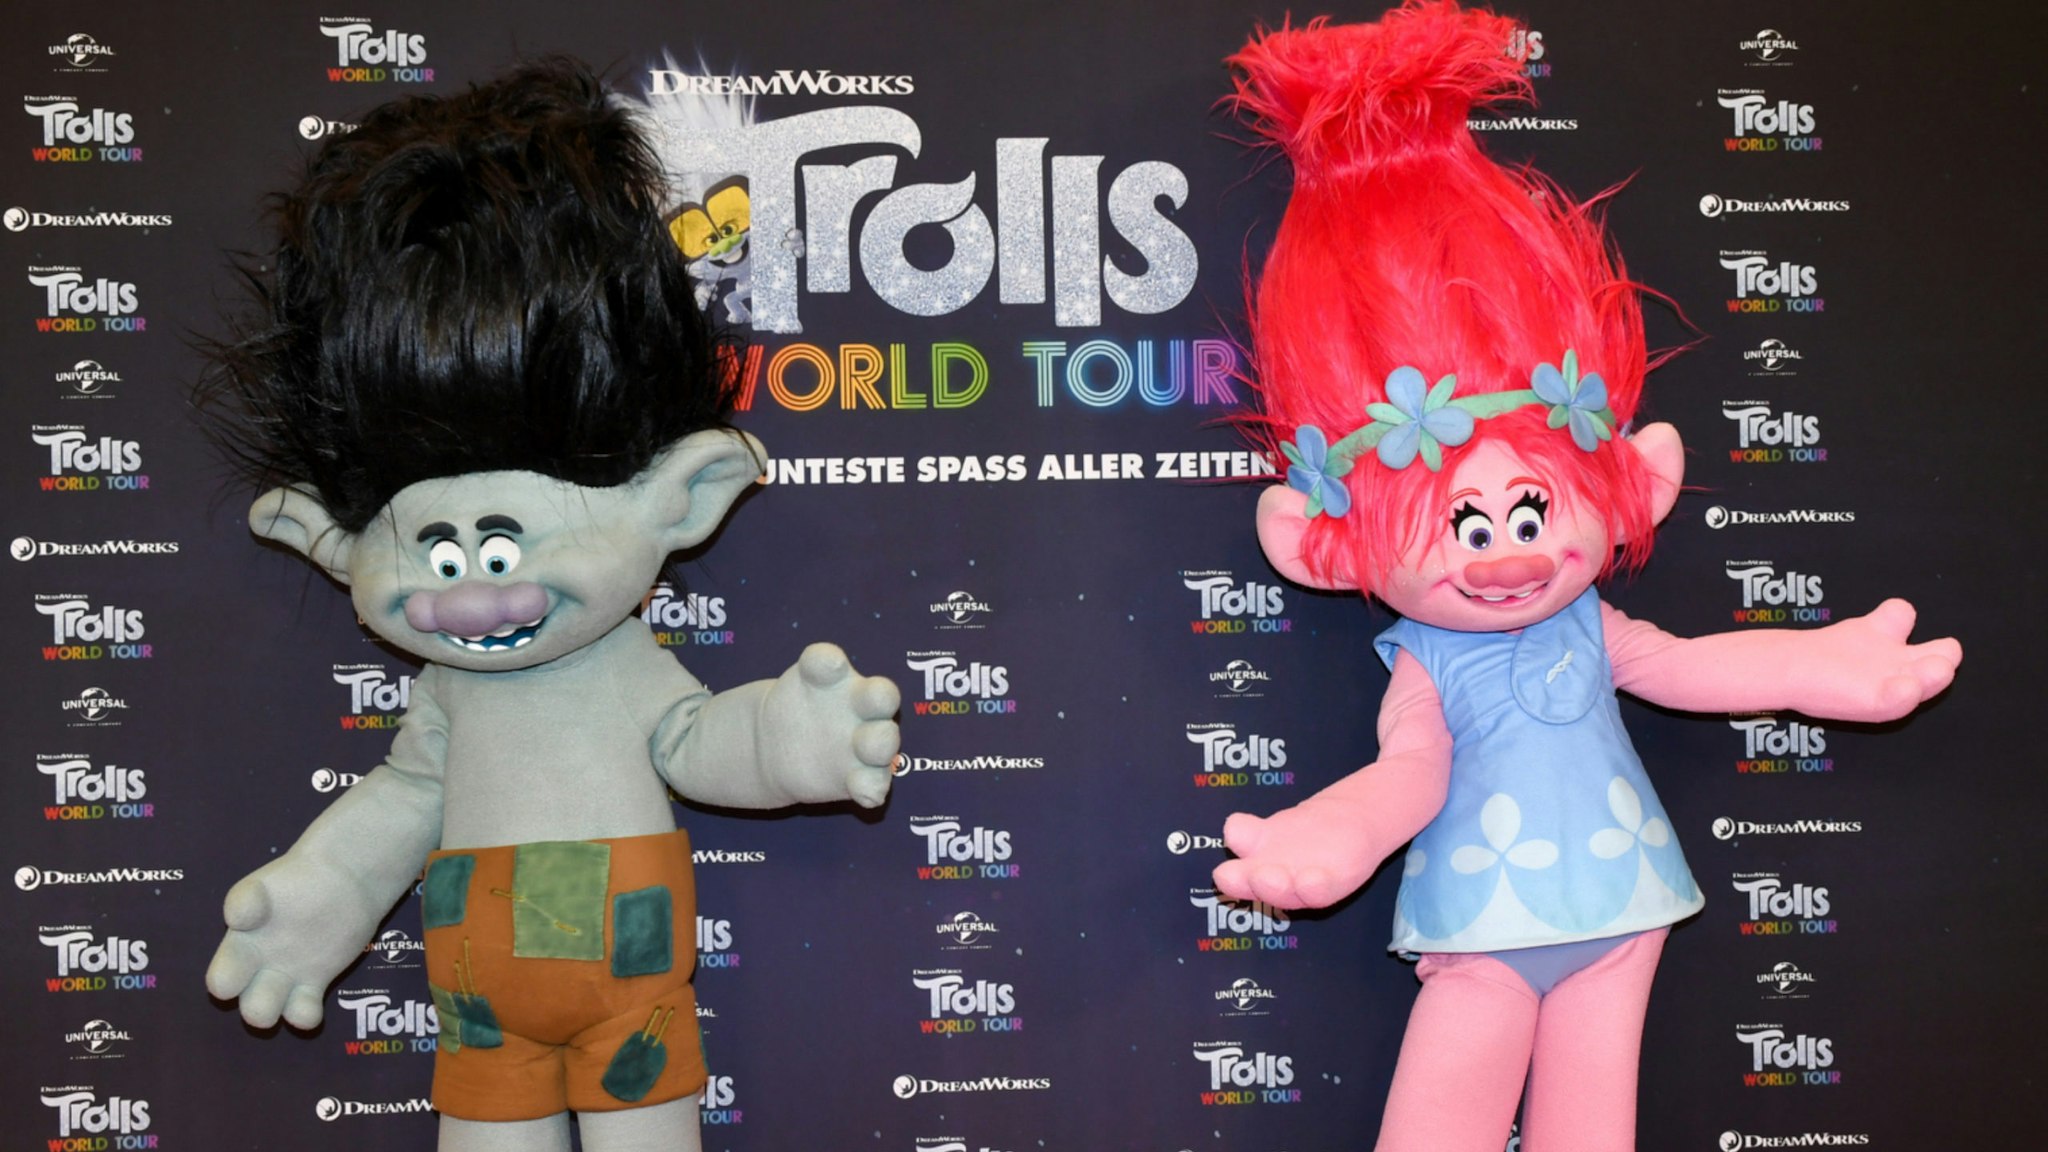 The Trolls figures Branch (l) and Poppy at the photo session for the movie "Trolls World Tour" at the Hotel Waldorf Astoria.